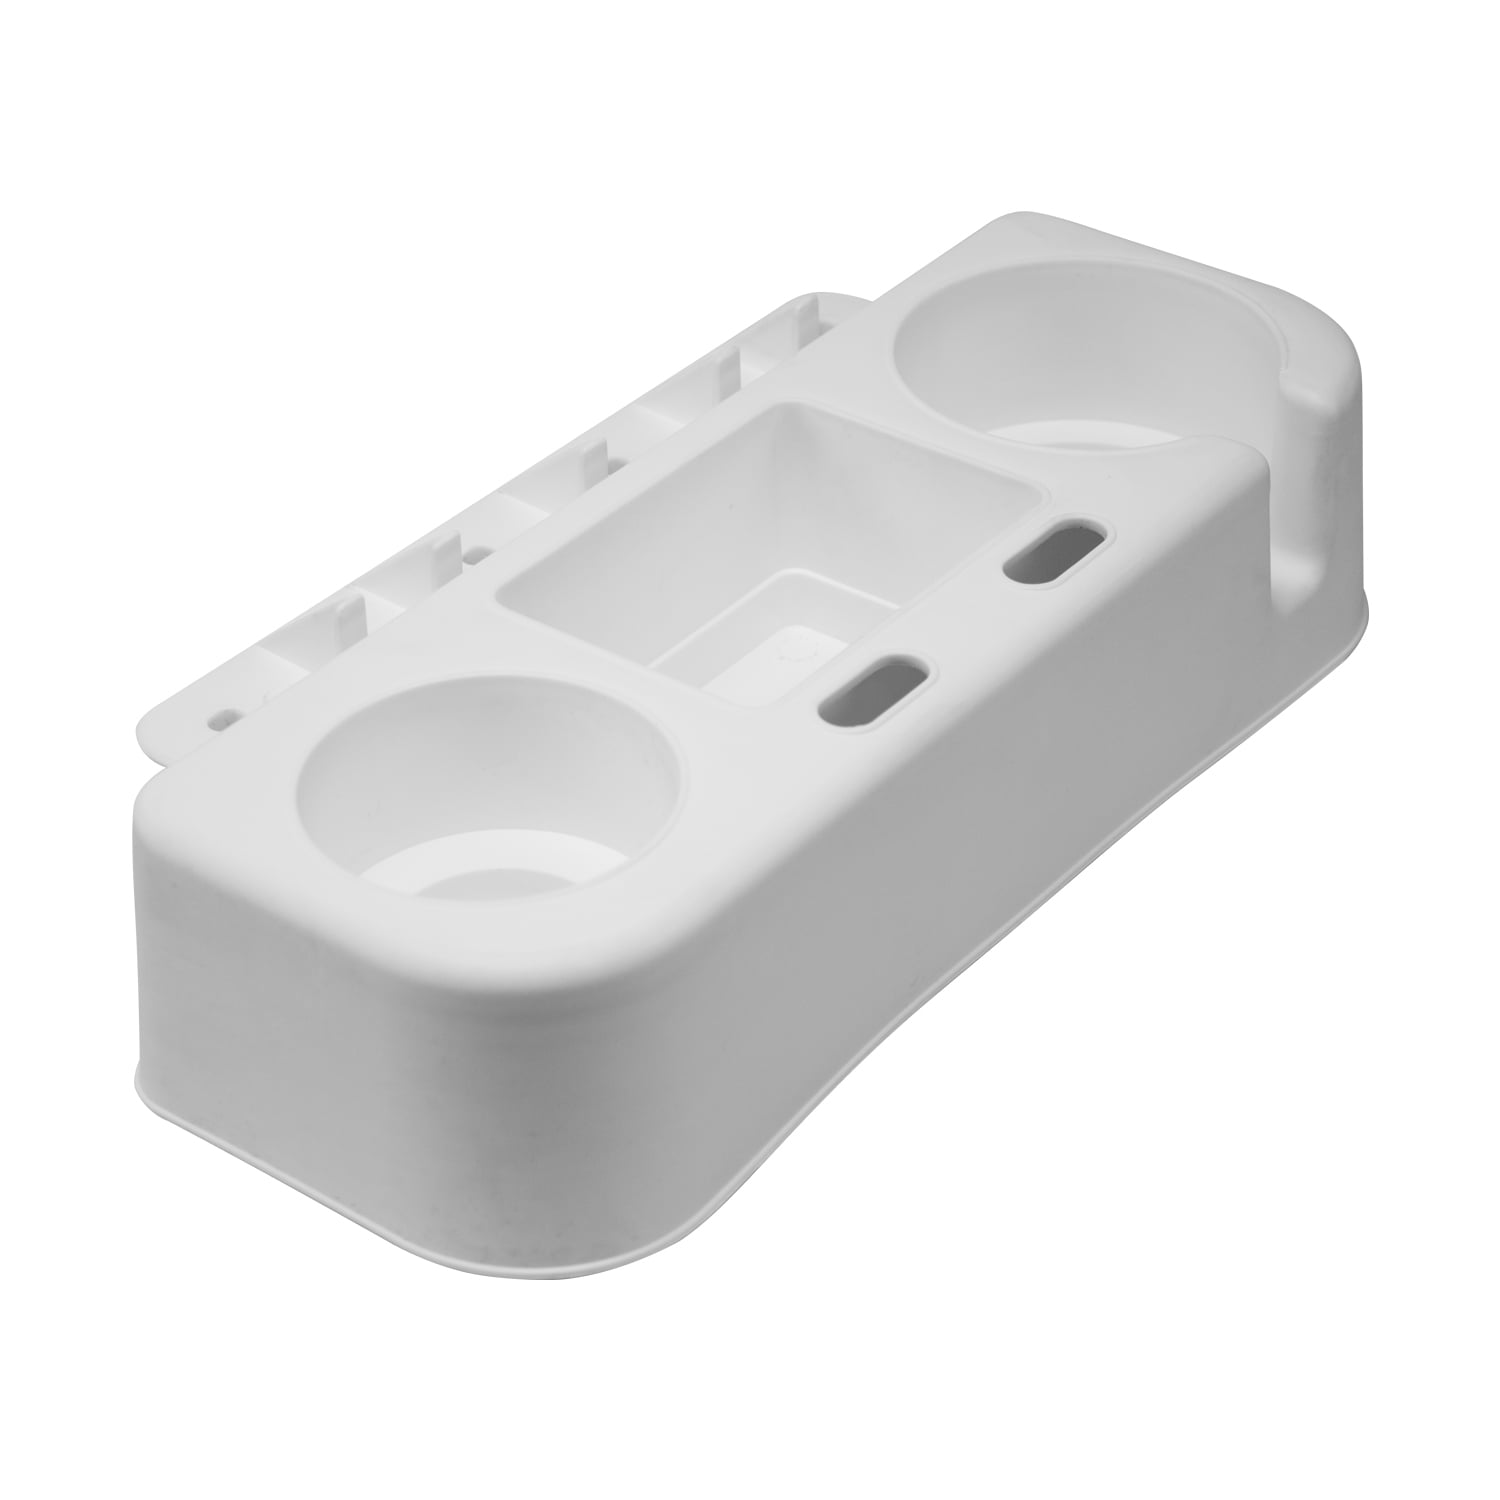 Wise 8WD1096-710 Seat Caddy Gear Holder, White 